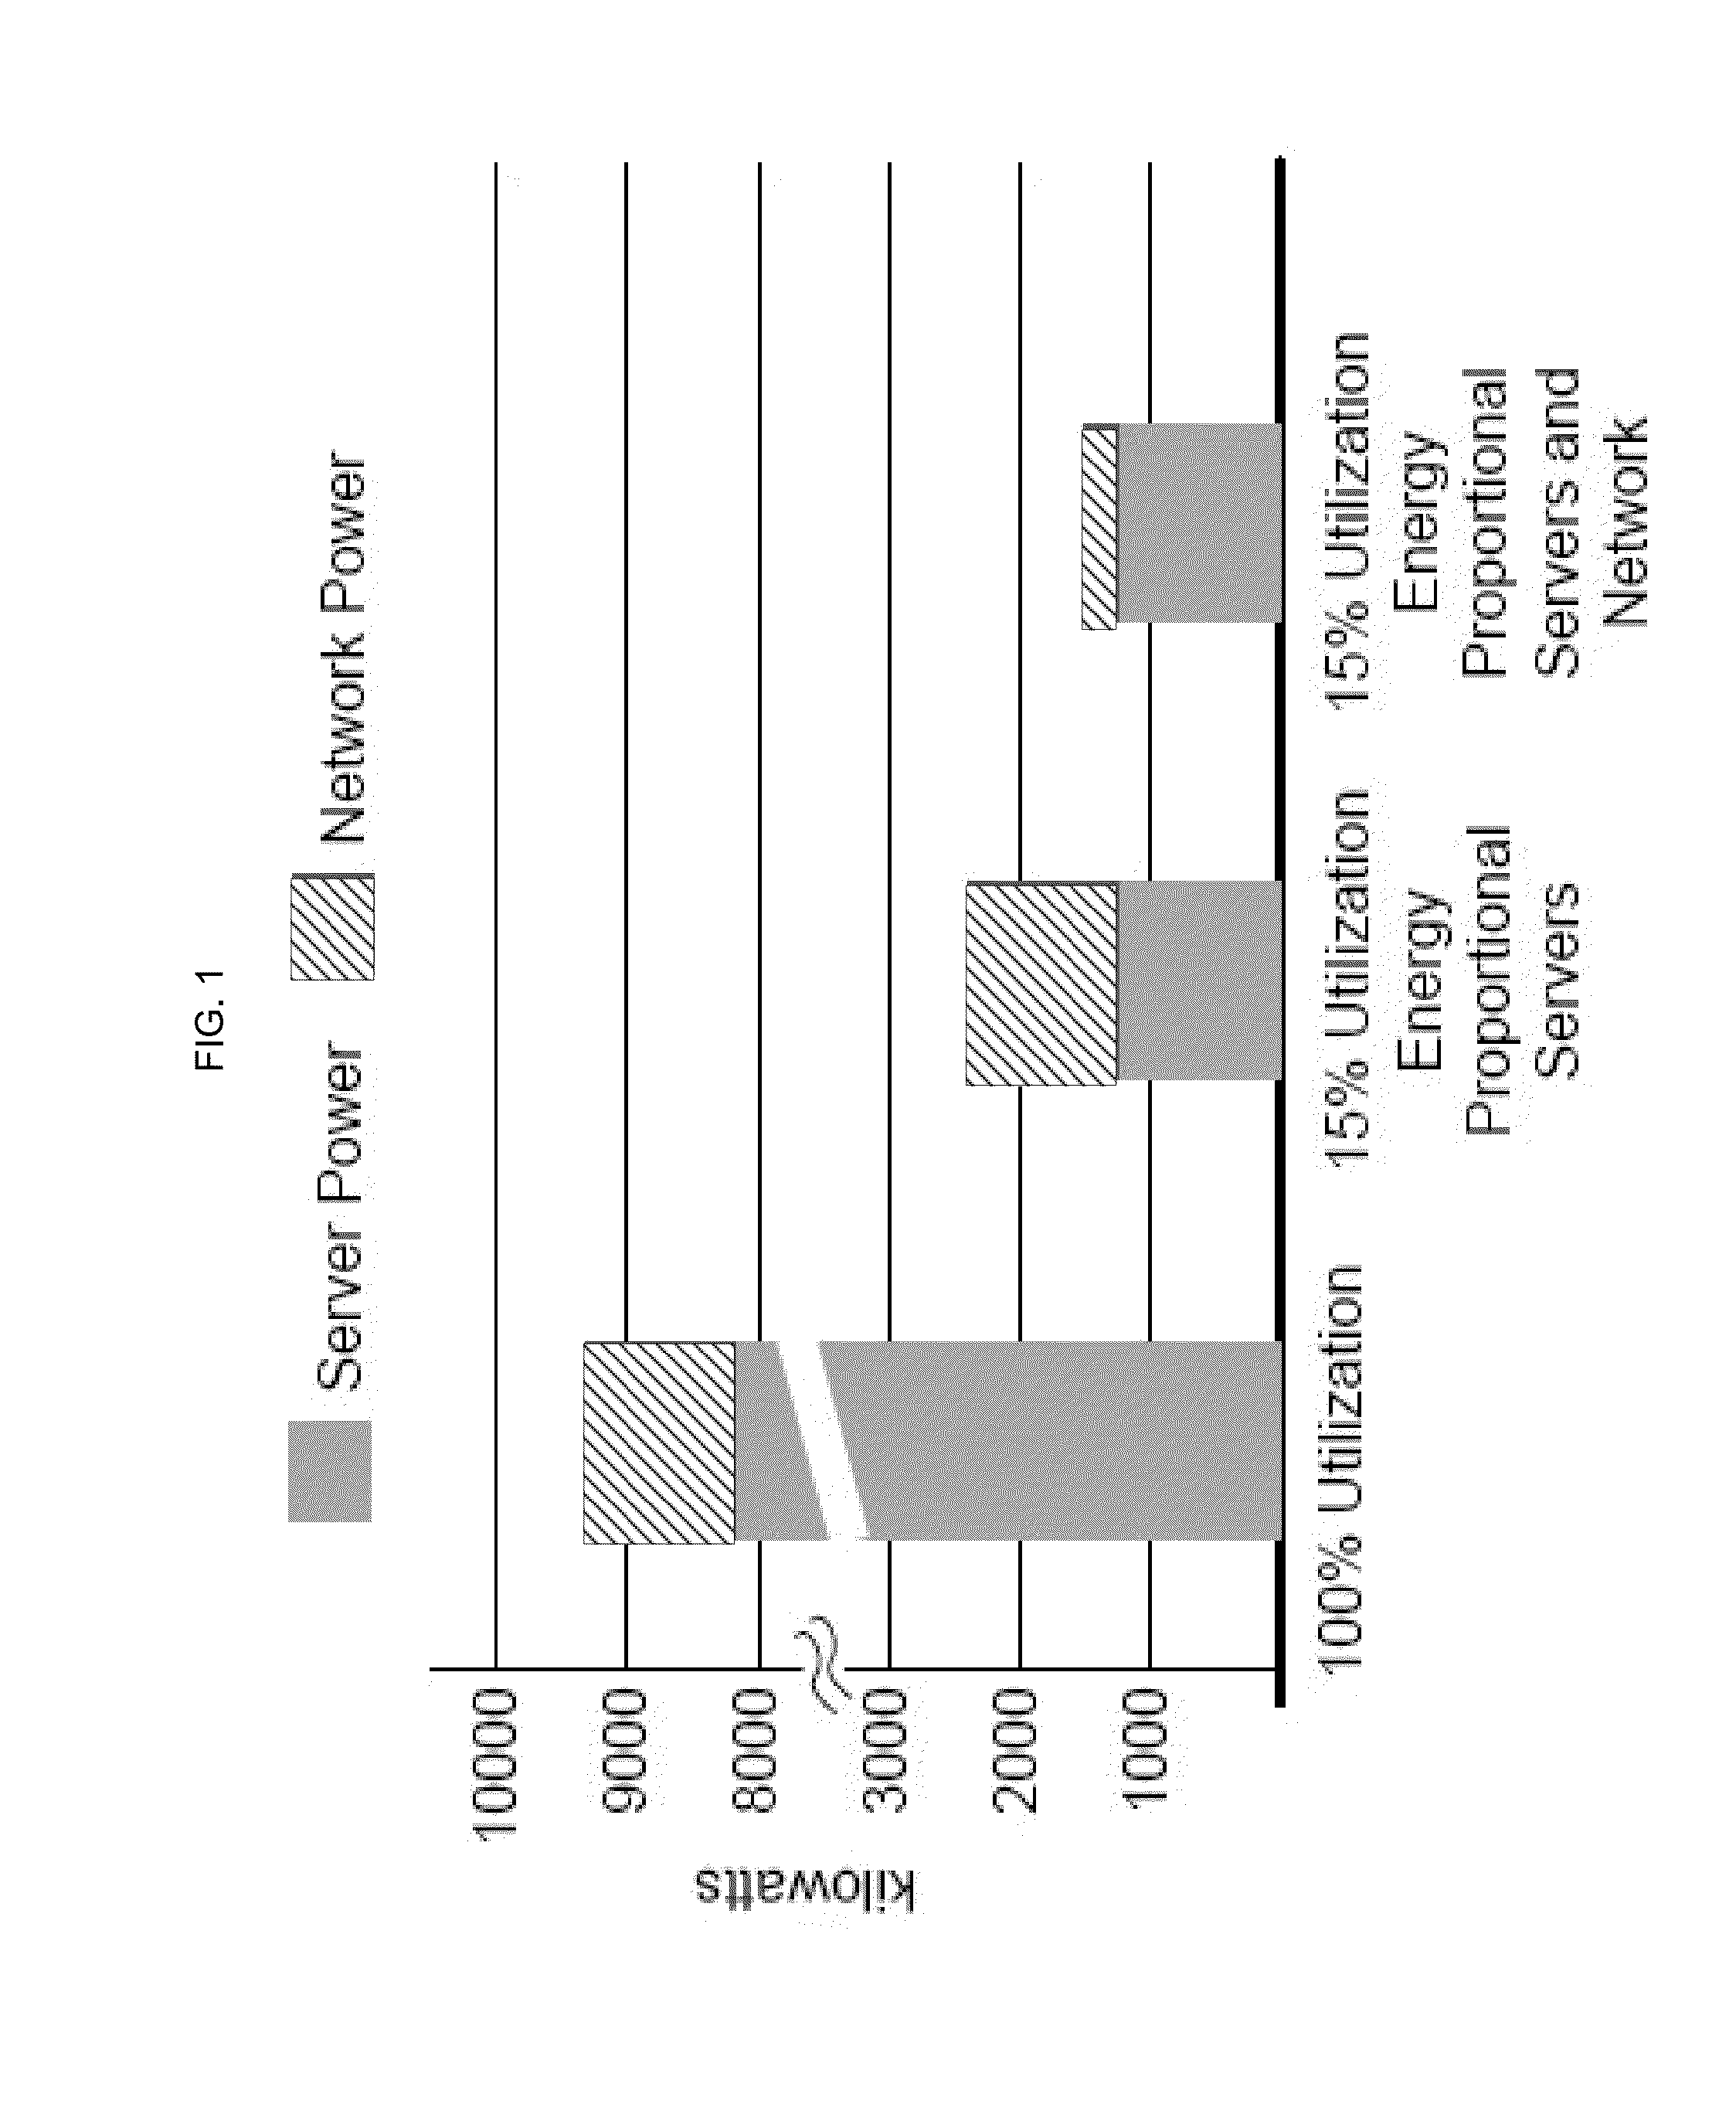 Systems and methods for energy proportional multiprocessor networks